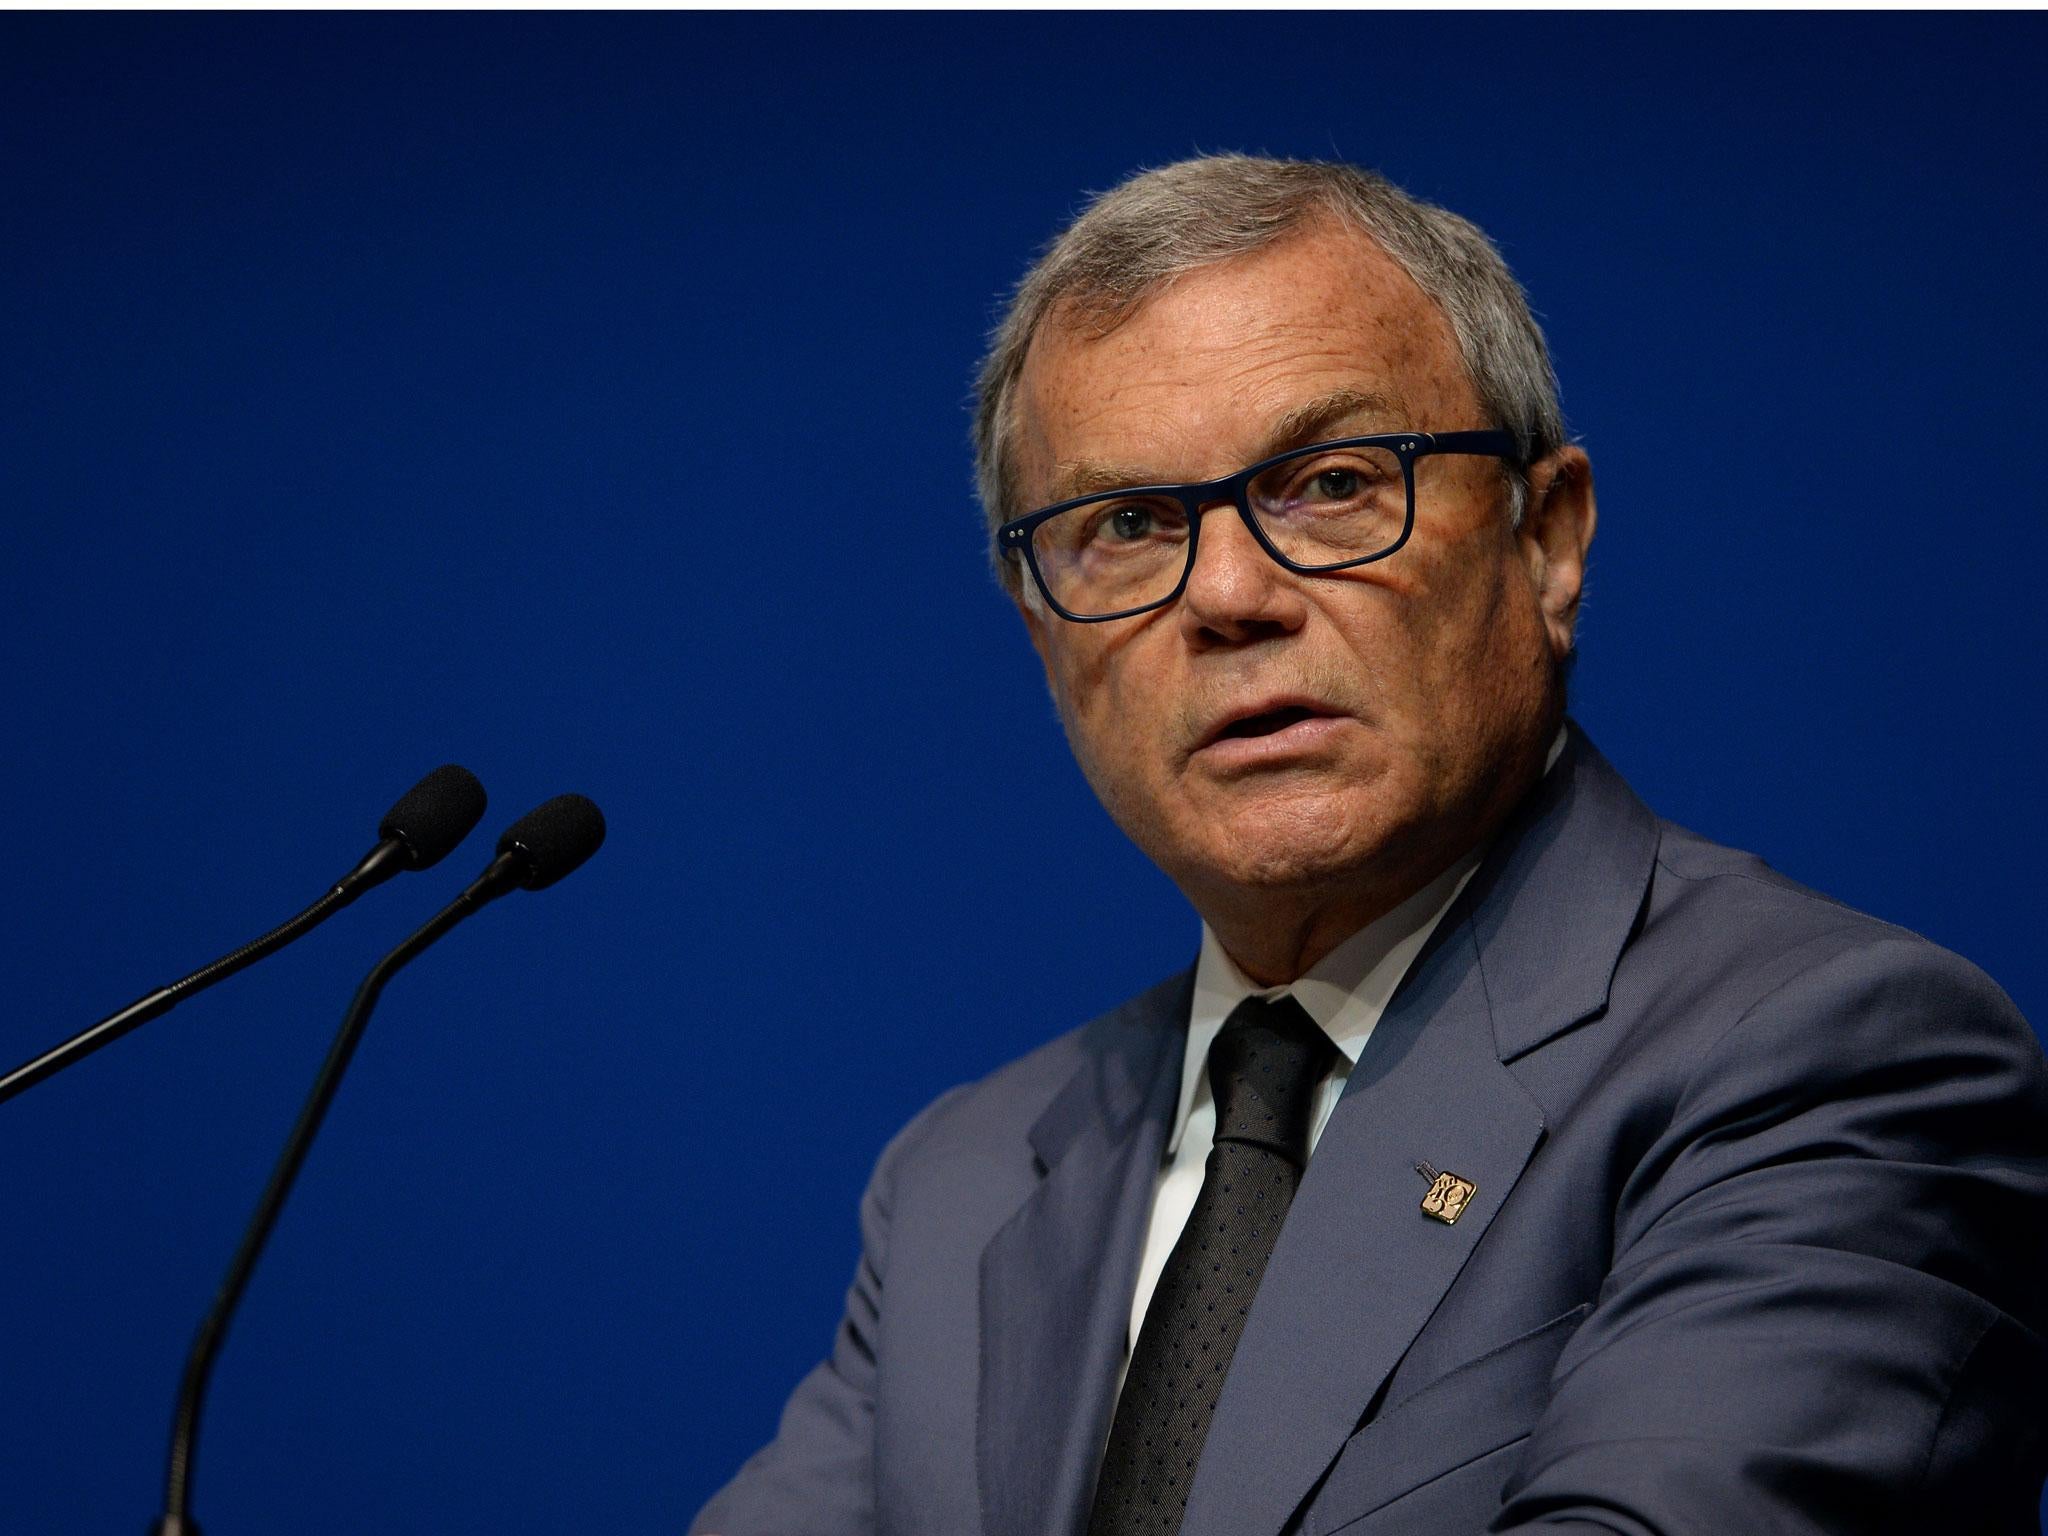 'For the short-term, we have to weather the storm,' chief executive Martin Sorrell said in a statement